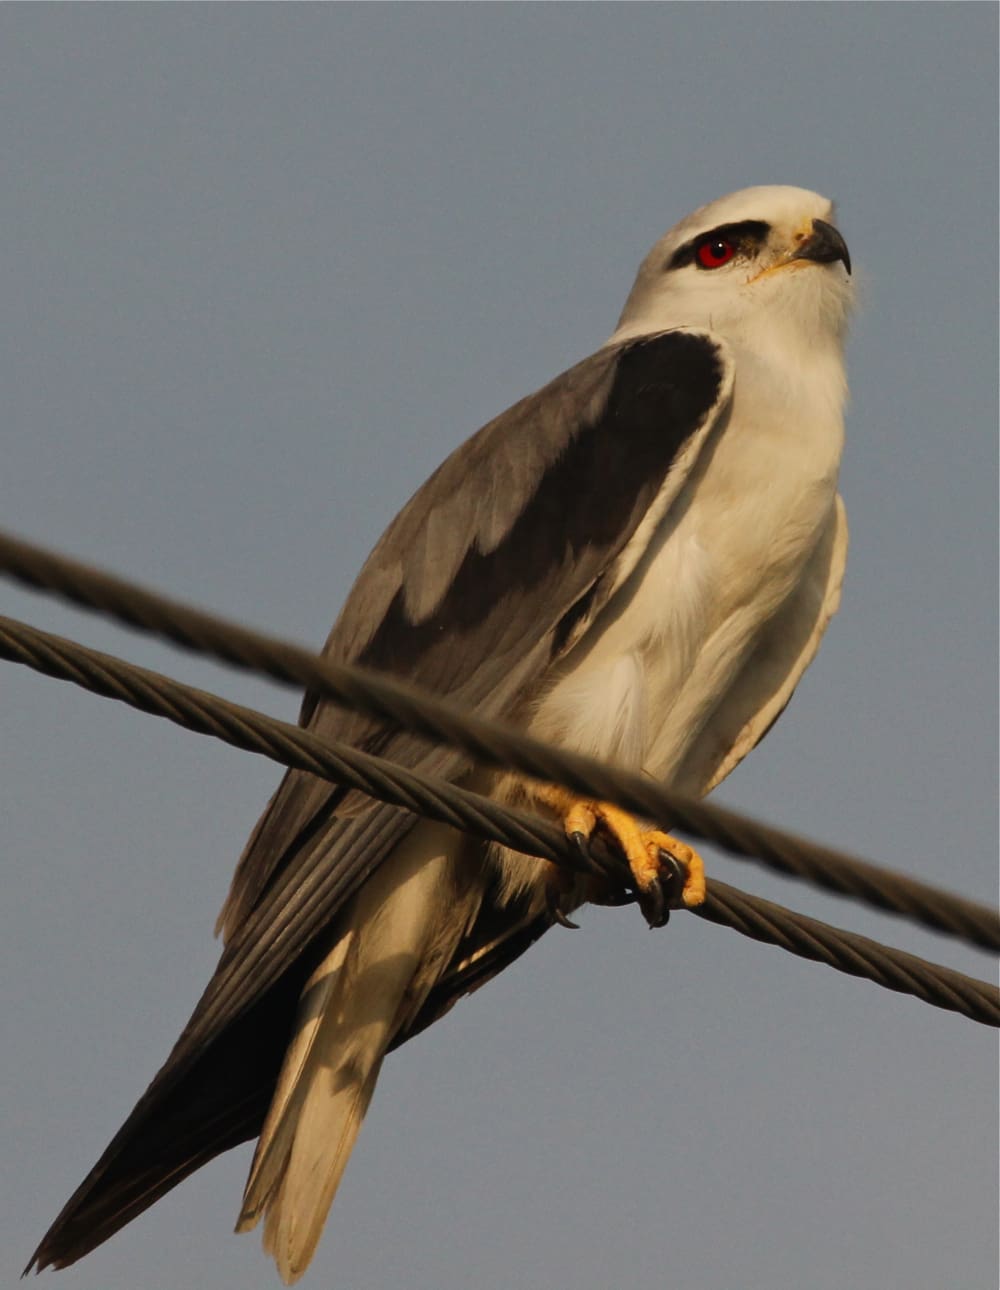 A Black Shouldered Kite looking back at the year that went by